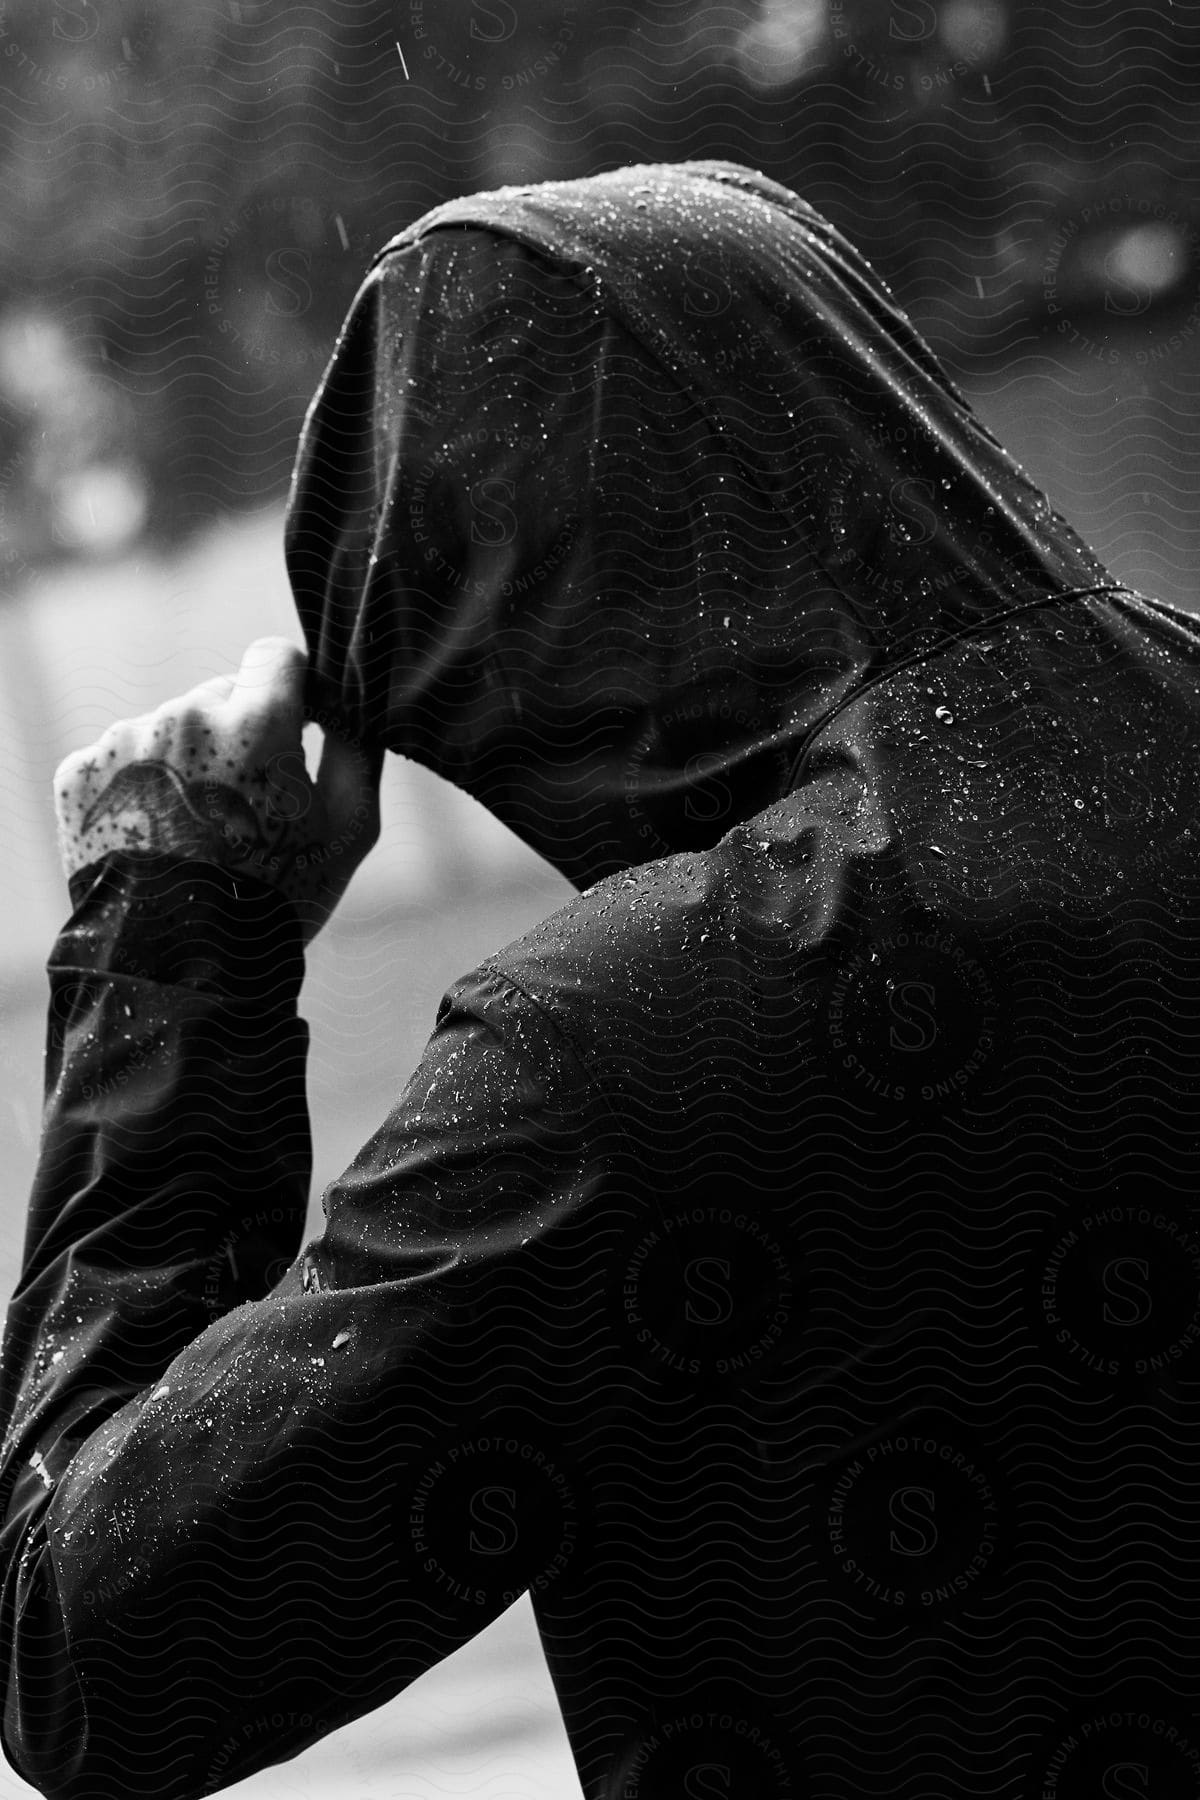 Rain falls on a black-jacketed figure pulling up their hood, revealing only a tattooed hand.